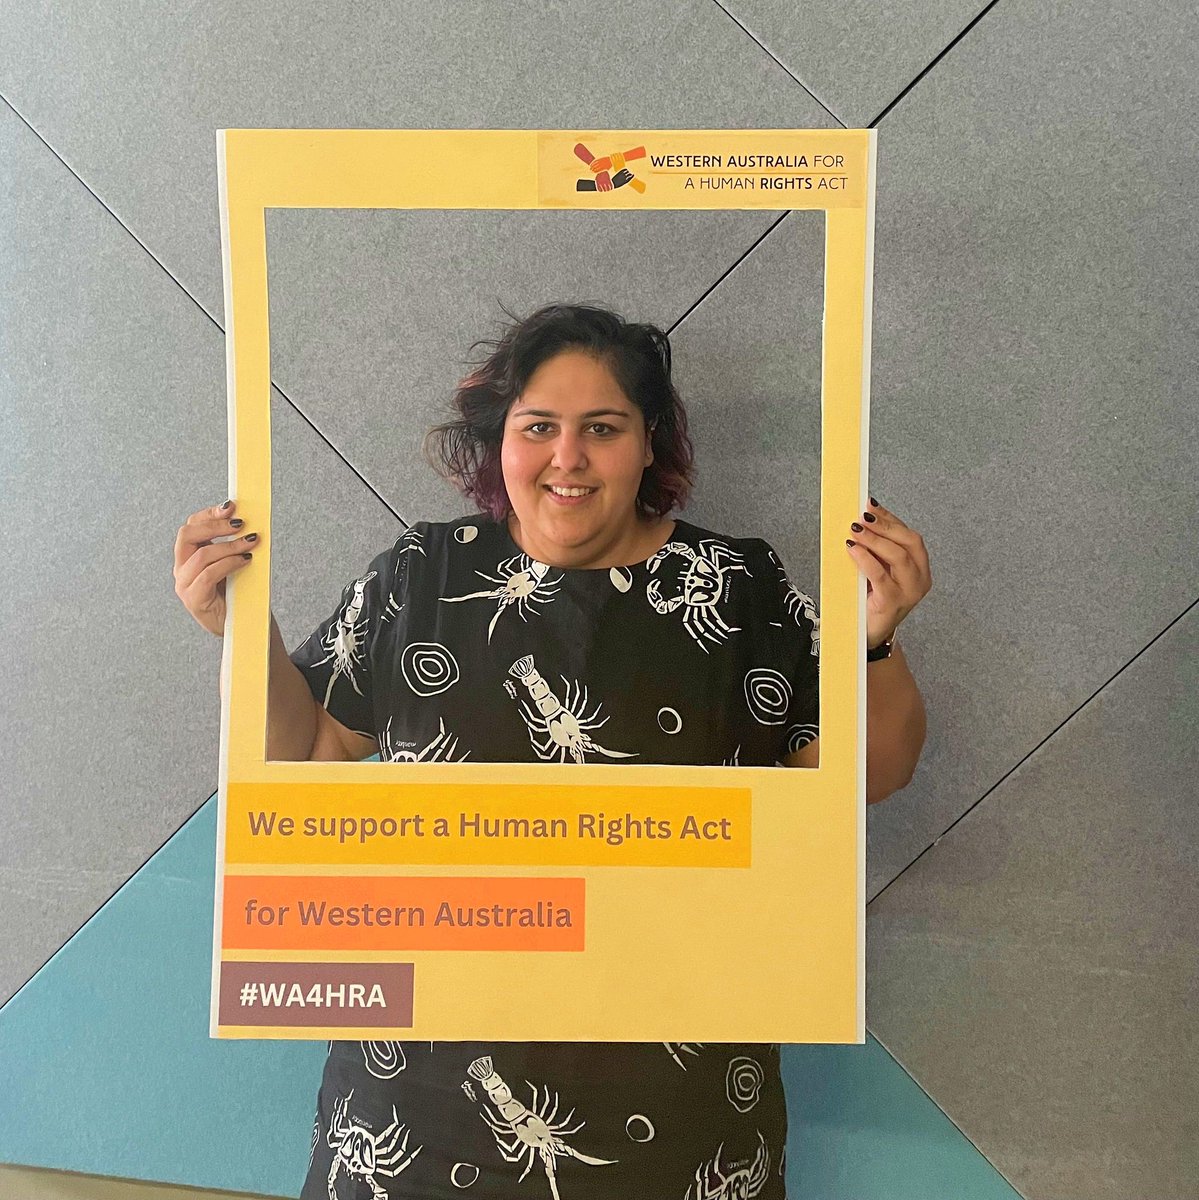 Richa Malaviya, Solicitor at Women's Legal Service WA, supports the call for a Human Rights Act for Western Australia. #wa4hra